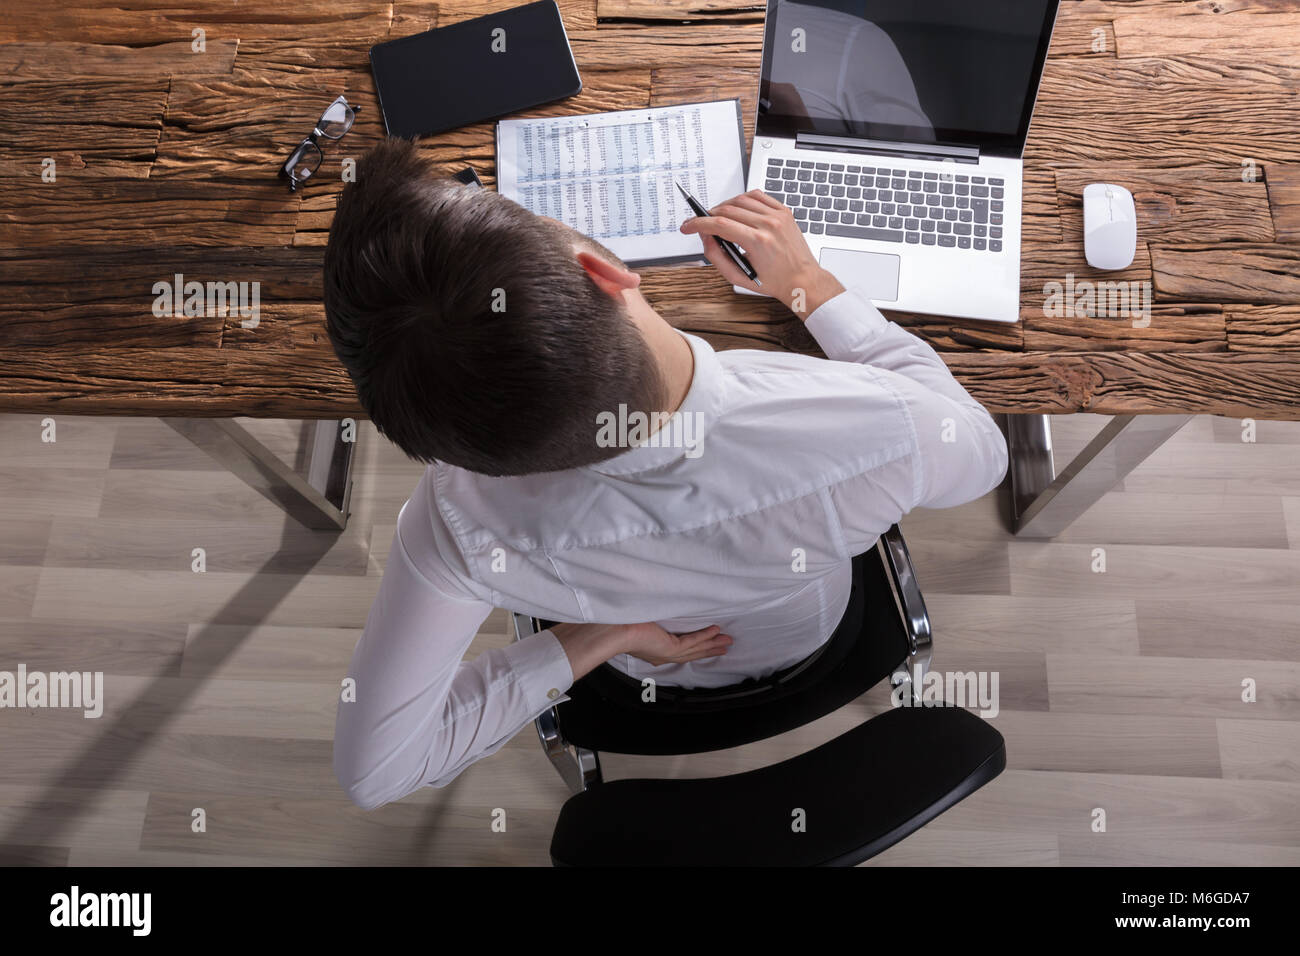 High Angle View Of A Businessman Suffering From Back Pain In Office Stock Photo